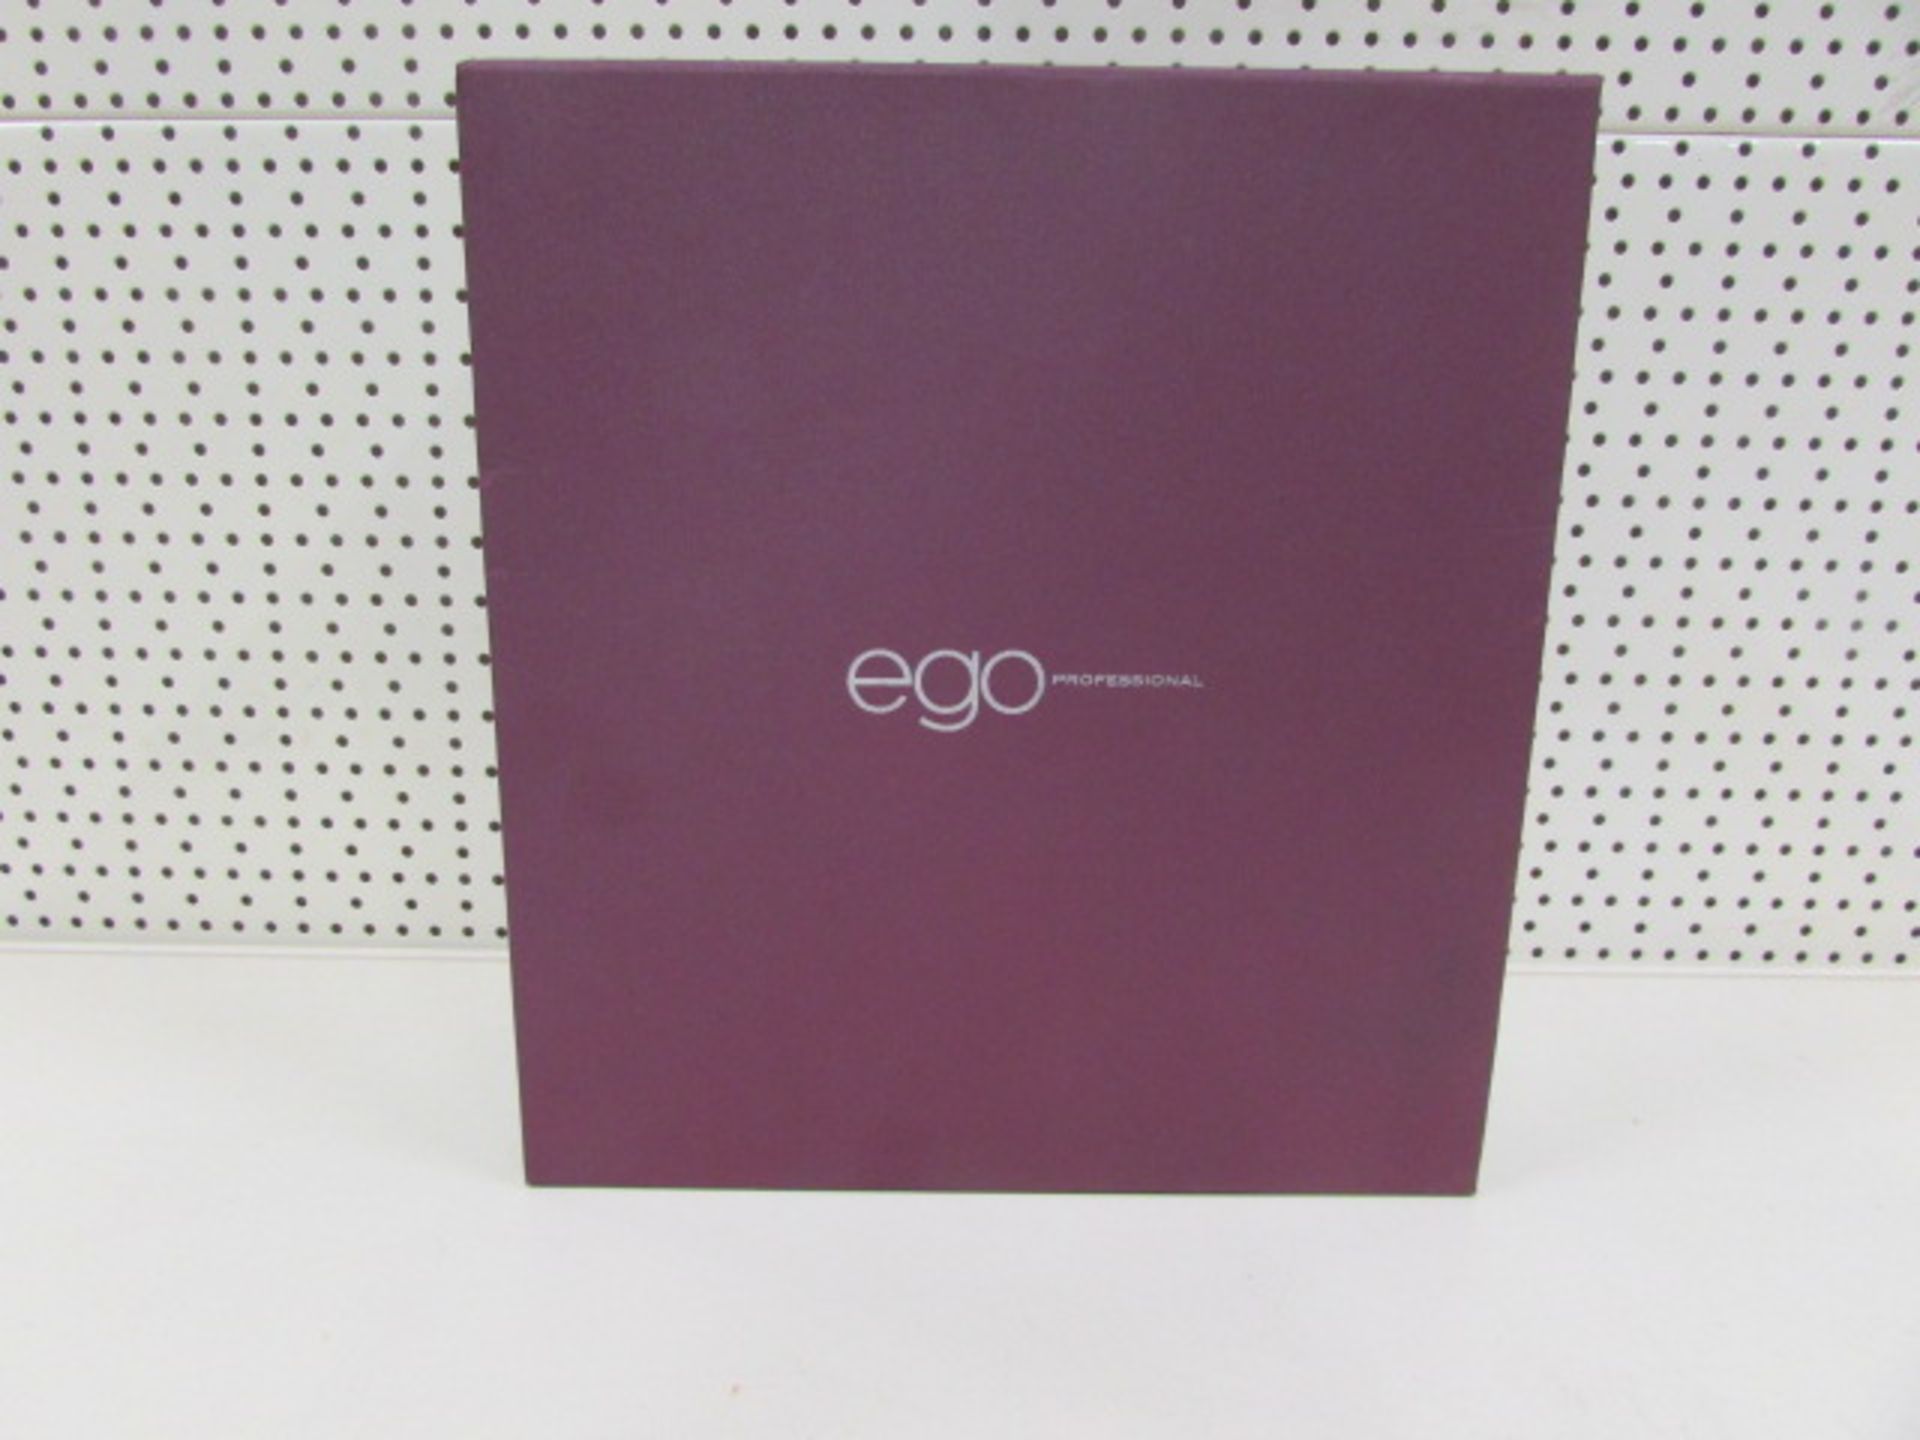 10 X Ego Professional Ego Evolve Hairdryer + Difusser [Brand New] - Image 6 of 6